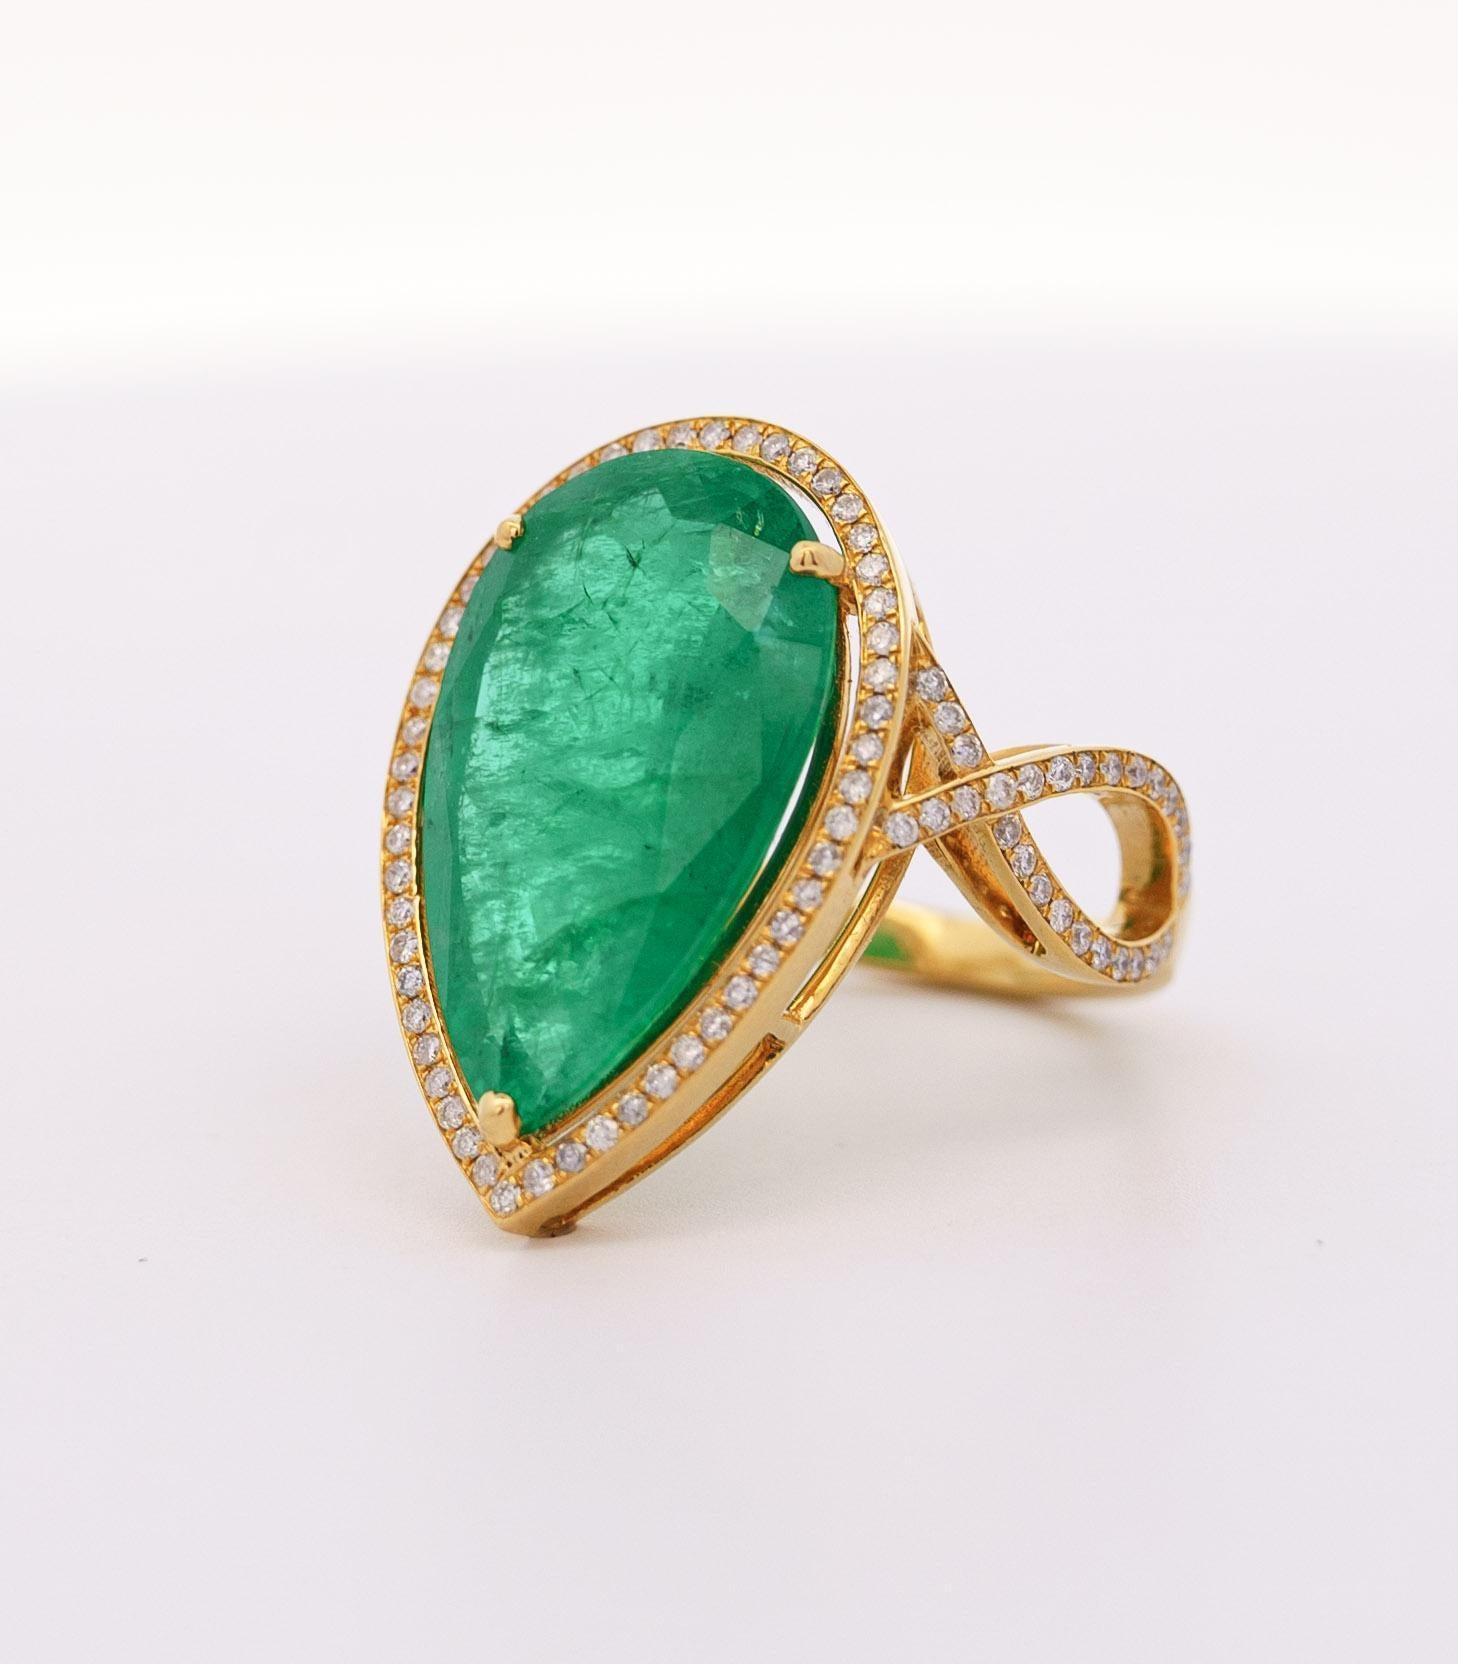 Vintage 9 Carat Pear Cut Zambian Emerald & Diamond Halo Ring Jacket in 18K Gold In Excellent Condition For Sale In Miami, FL